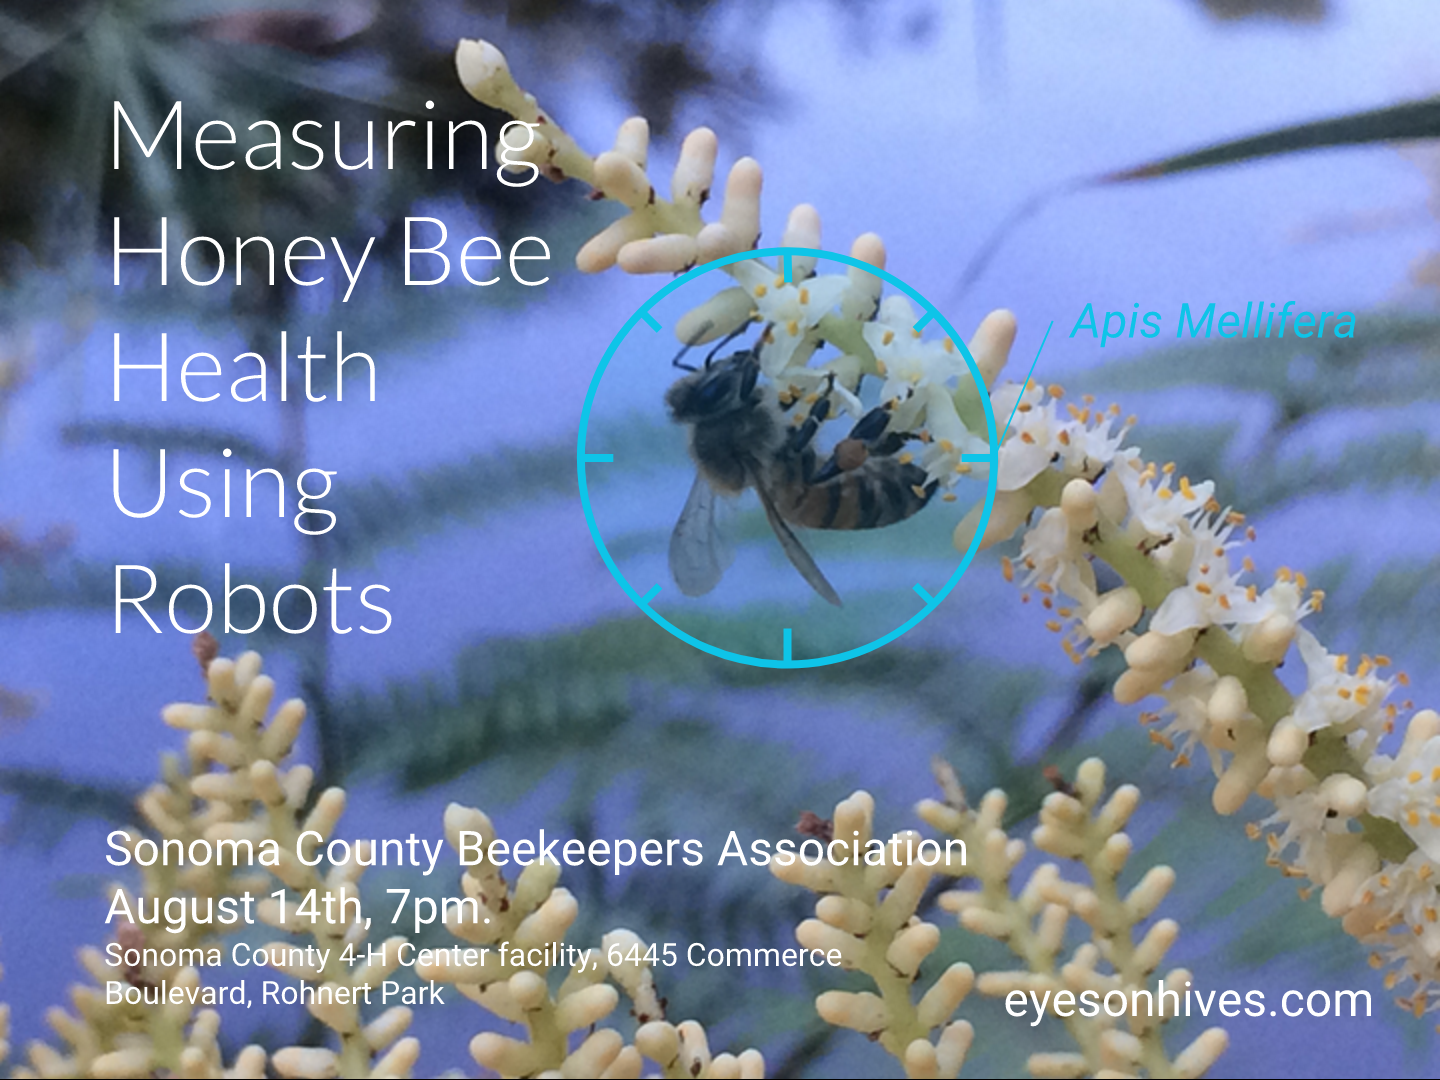 Join us for this exciting eyesonhives presentation with the Sonoma County Beekeepers Association